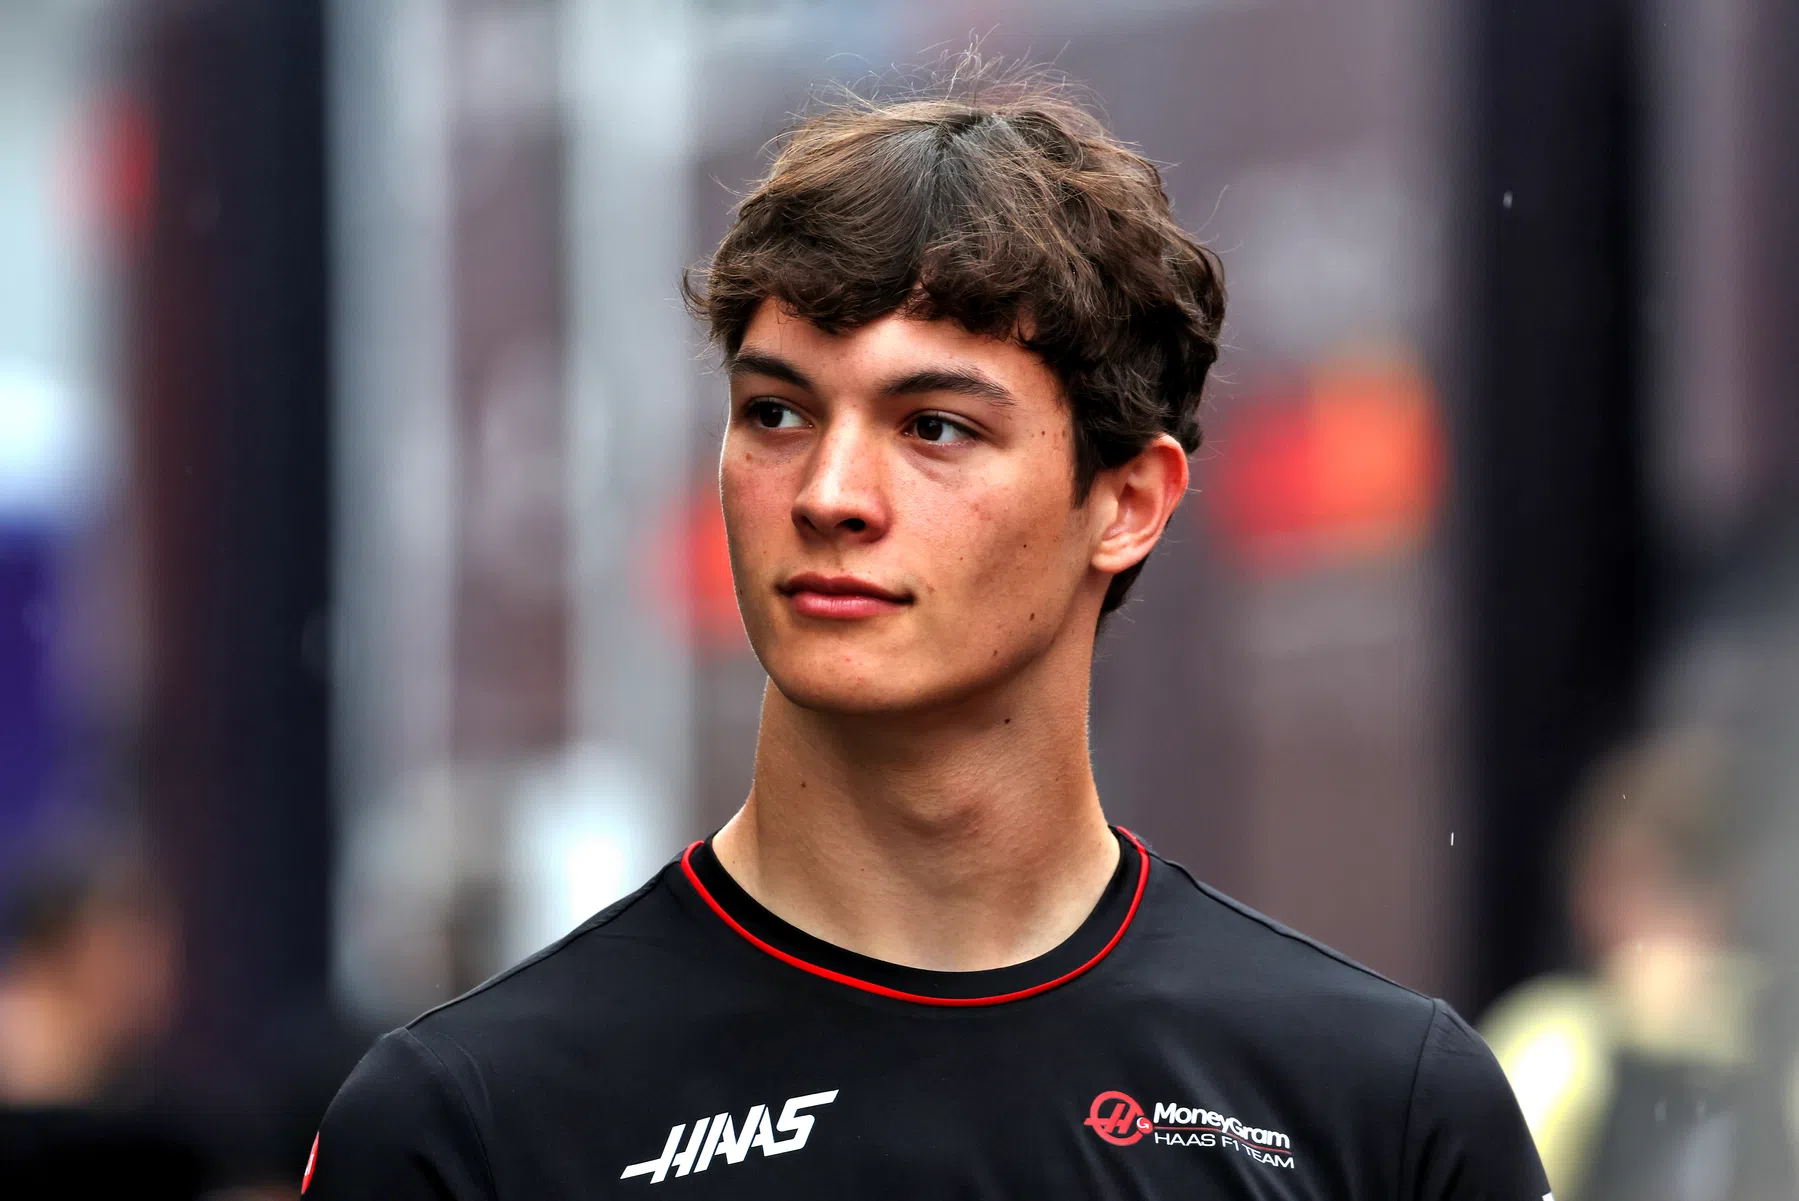 Oliver Berman speaks about his F1 future and Haas opportunities